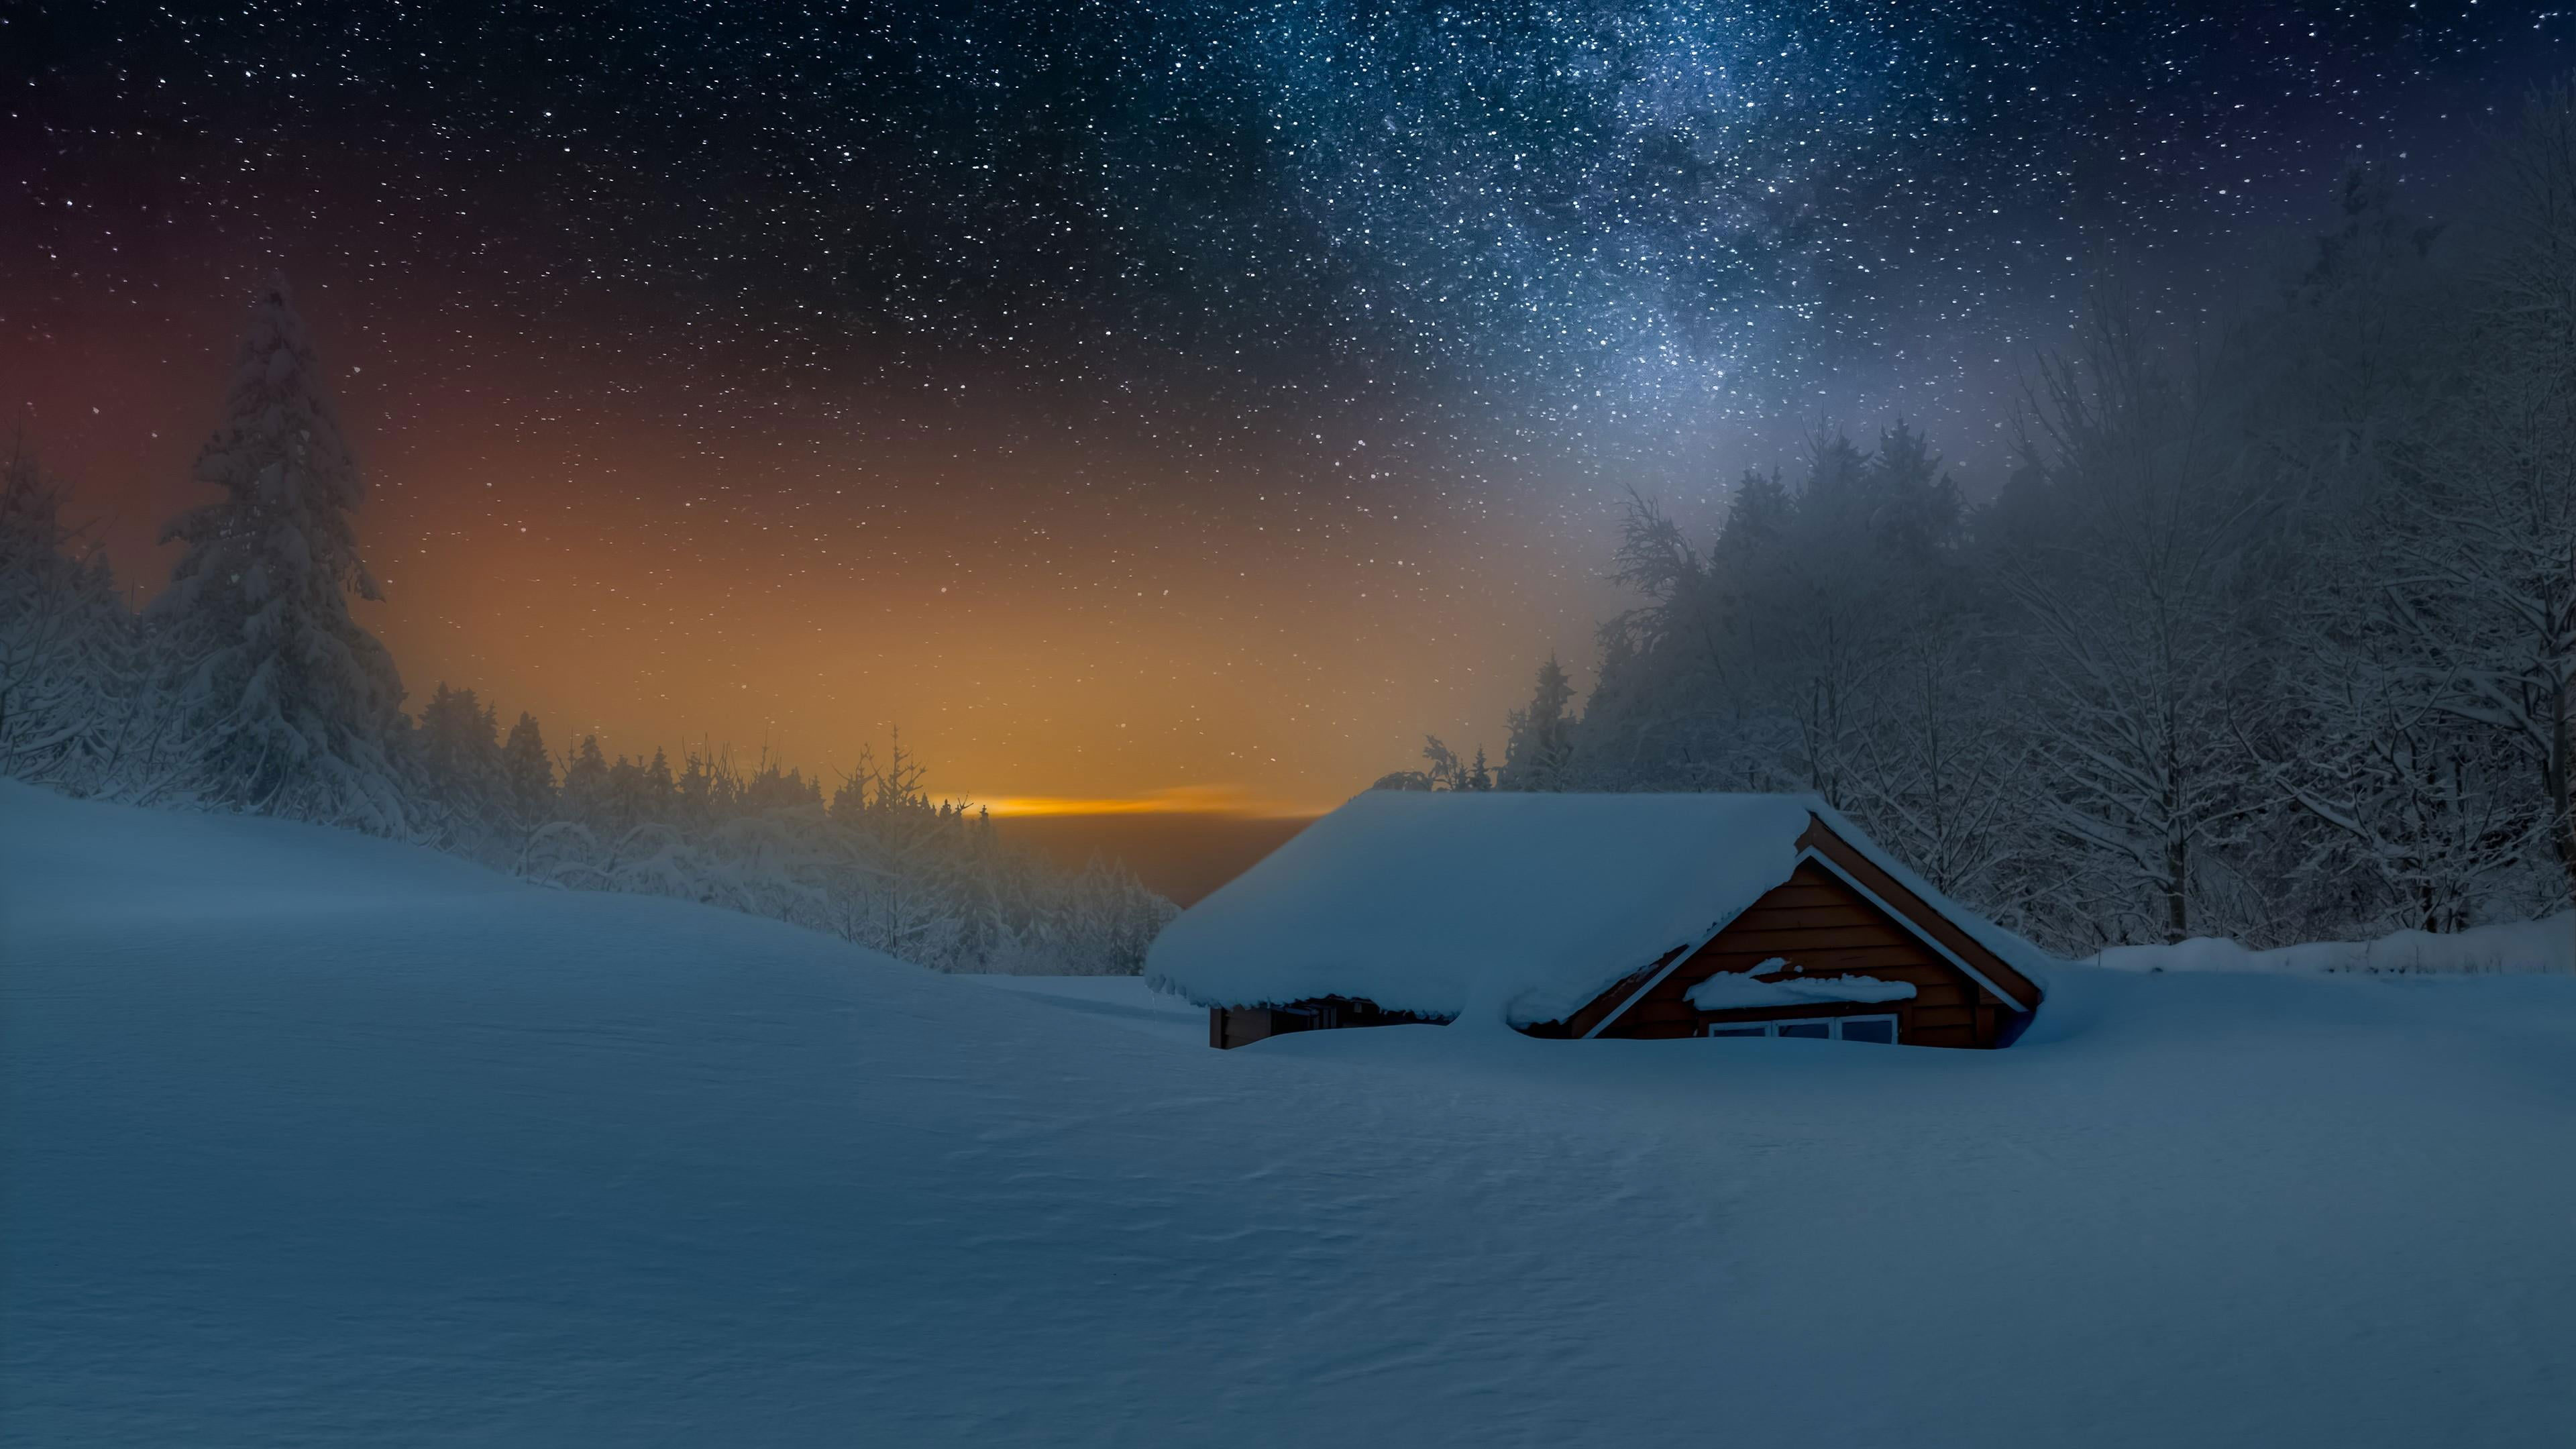 Wallpaper Snowy, Nature, Winter, Freezing, Sky, Starry, freezing, Nature